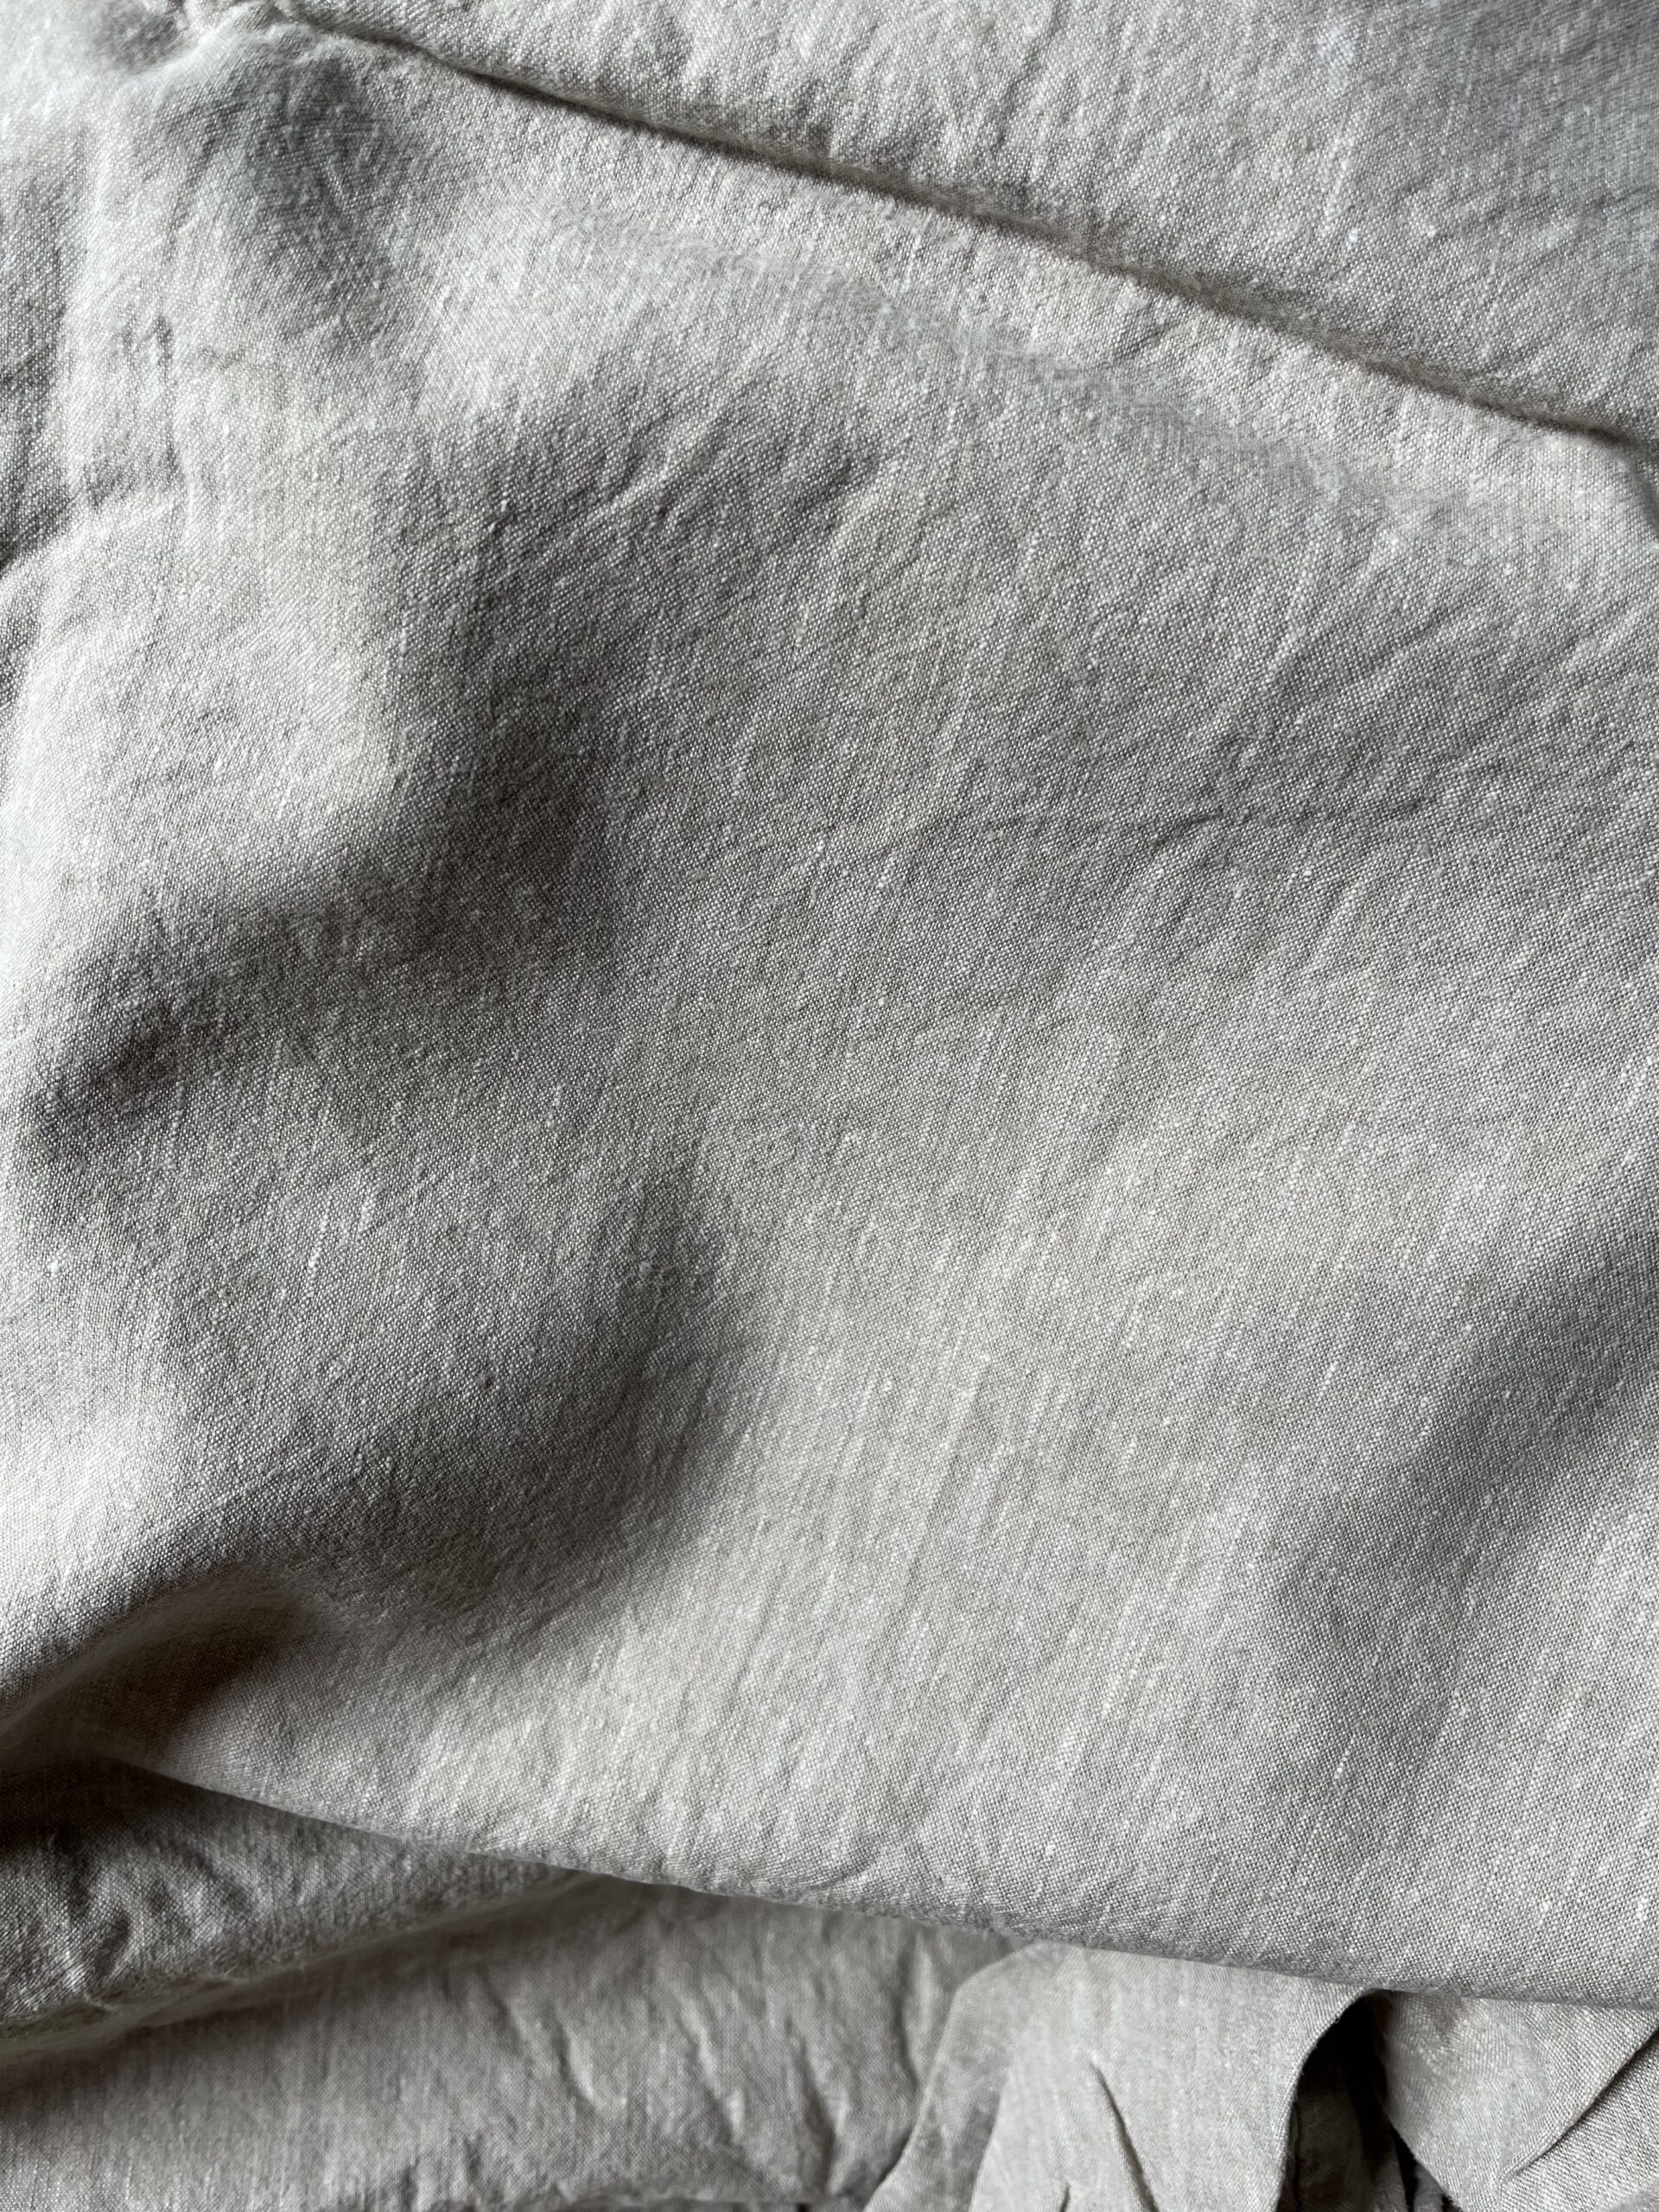 Close-up view of a crumpled, light grey fabric, displaying its texture and weave pattern.